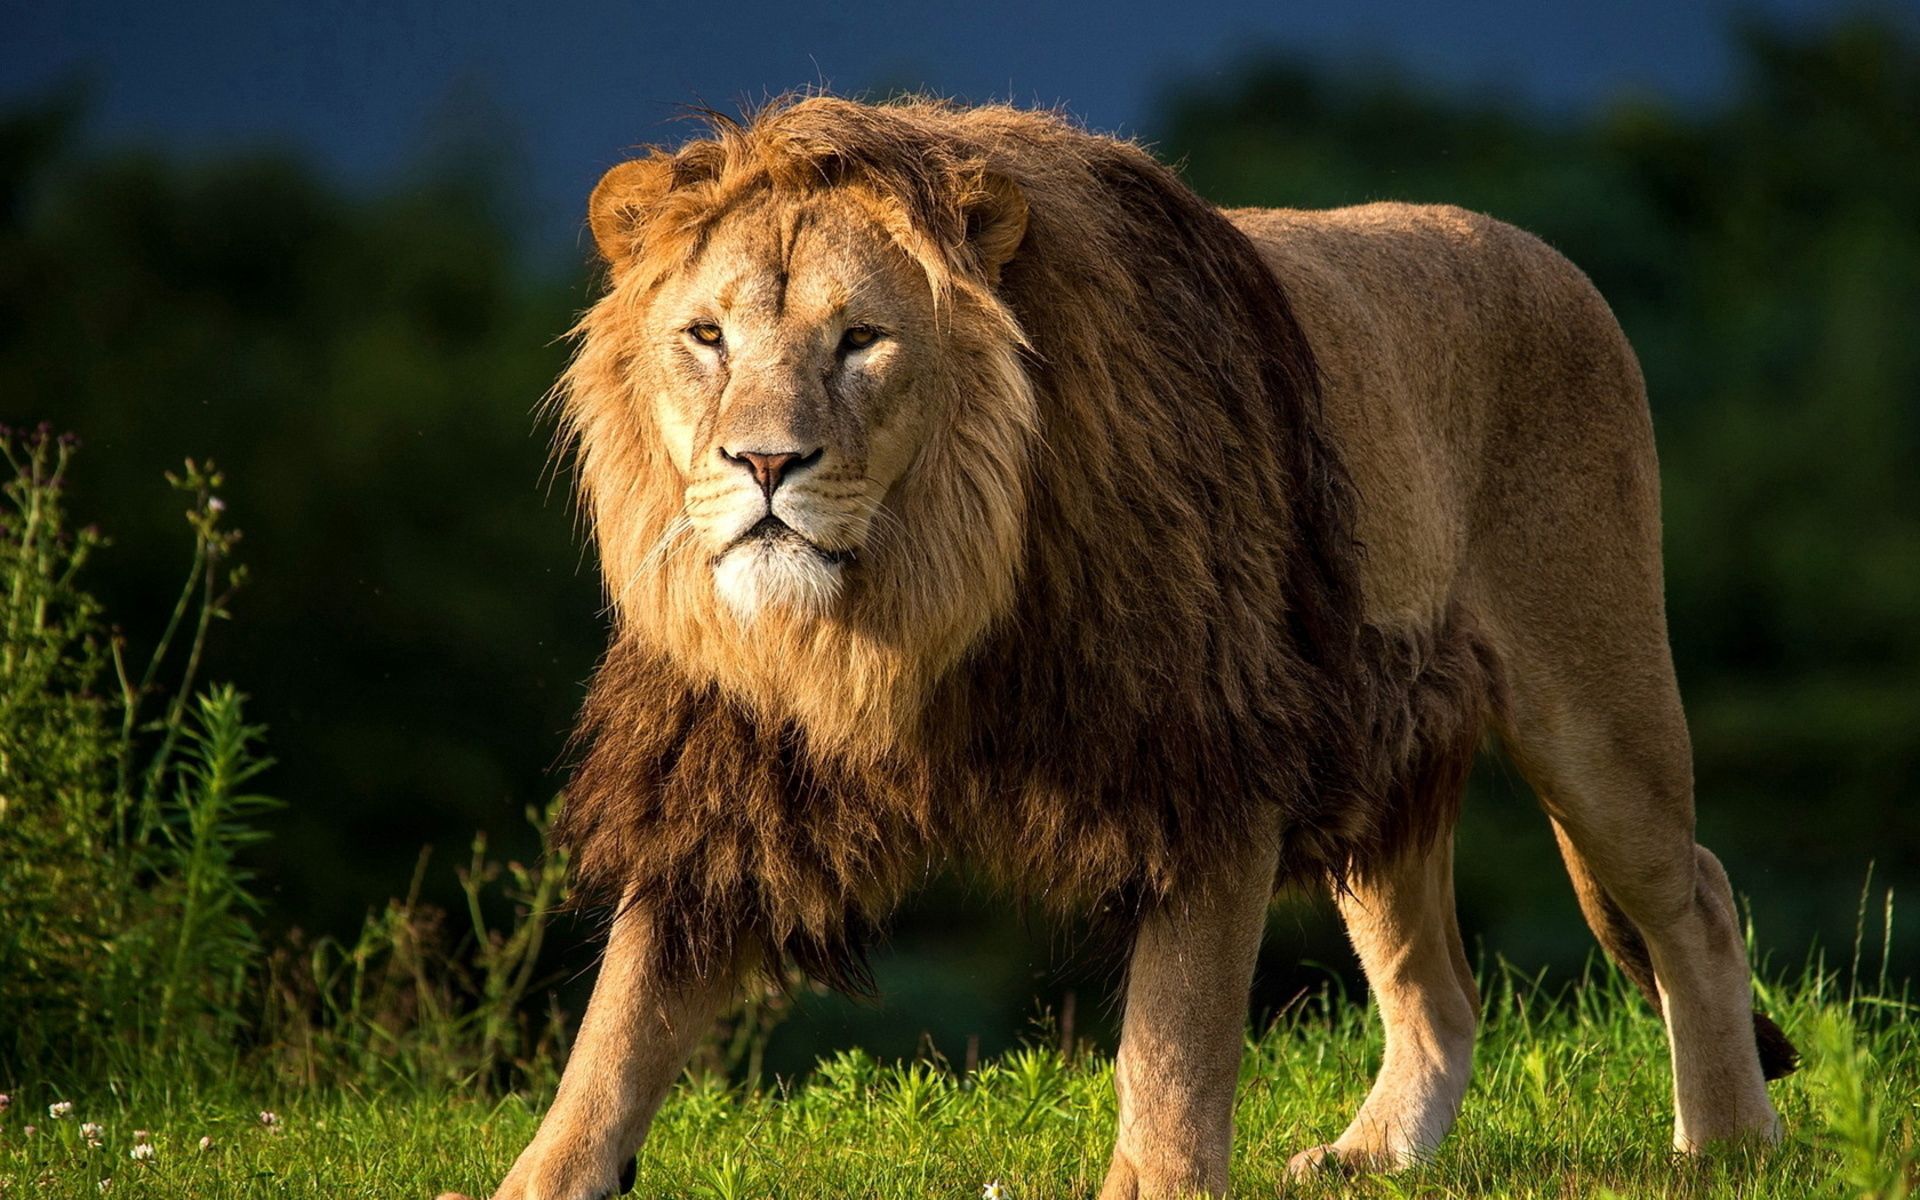 animals, stroll, big cat, grass, lion, king of beasts, king of the beasts iphone wallpaper